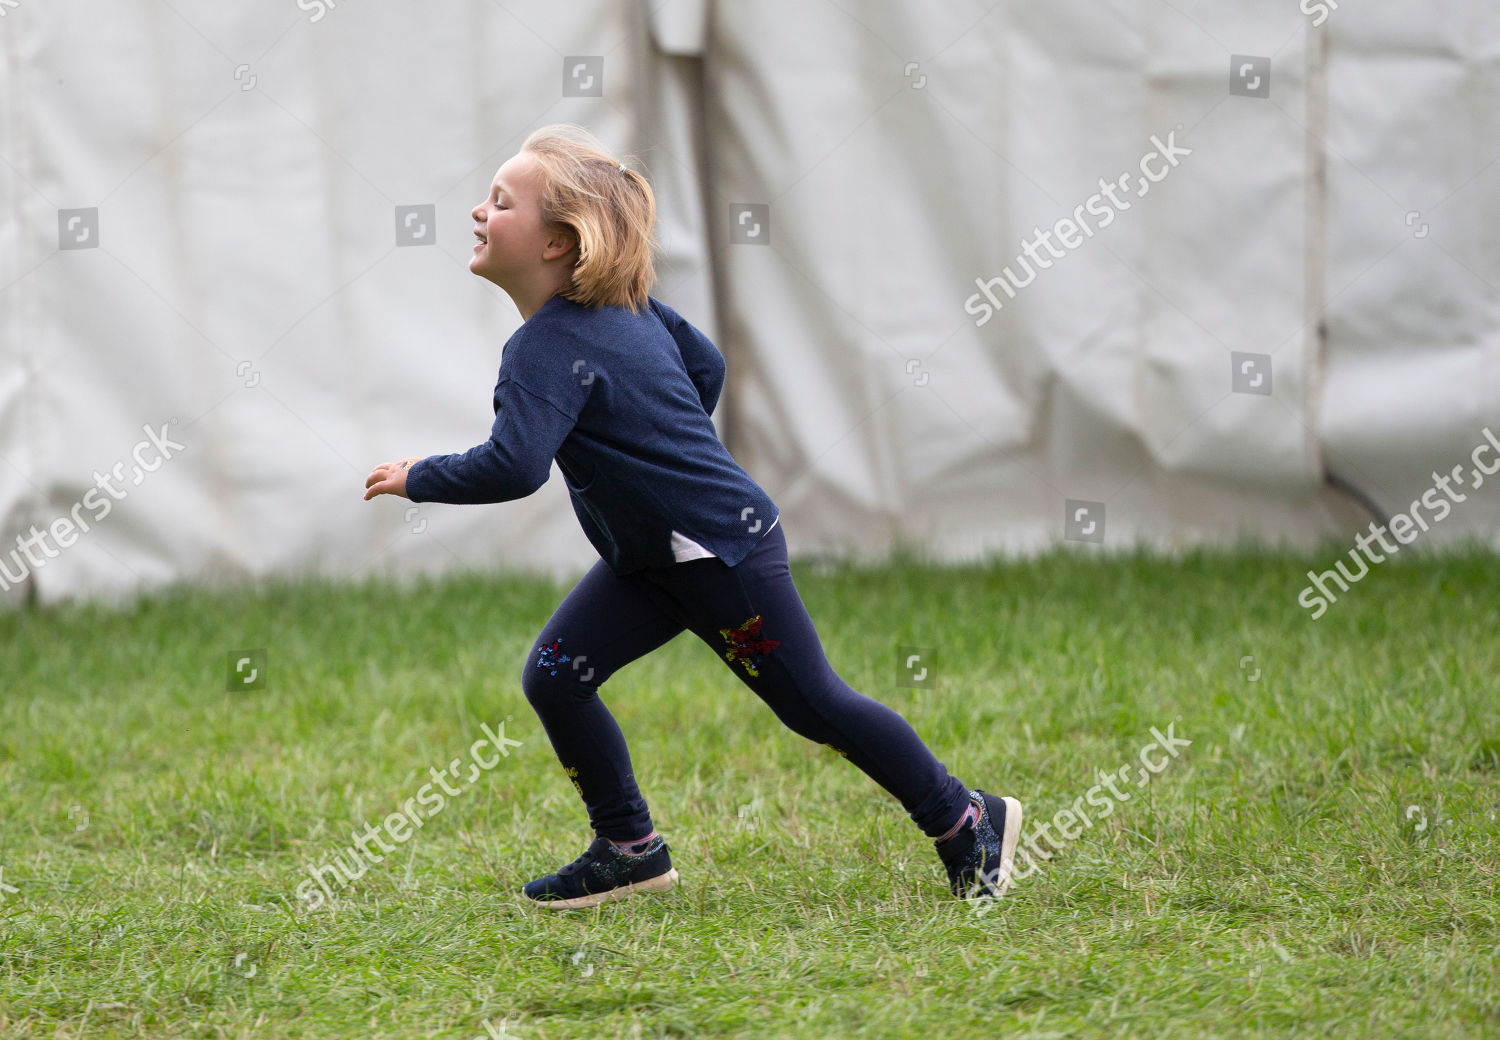 whately-manor-international-horse-trials-at-gatcombe-park-gloucestershire-uk-shutterstock-editorial-9877099q.jpg